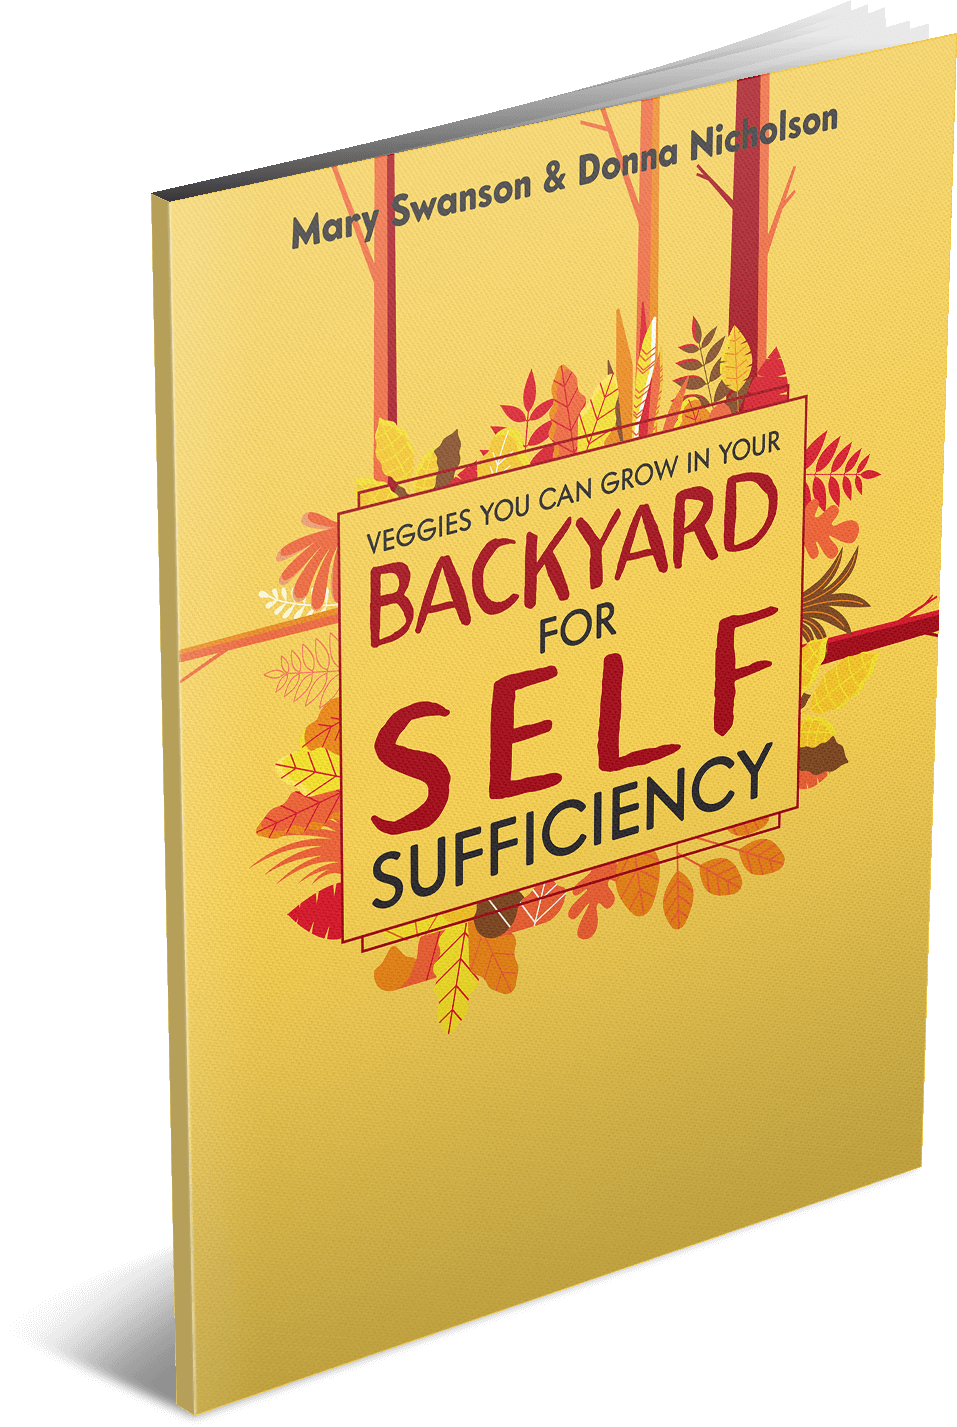 Veggies You Can Grow in Your Backyard for
                                    Self-Sufficiency book